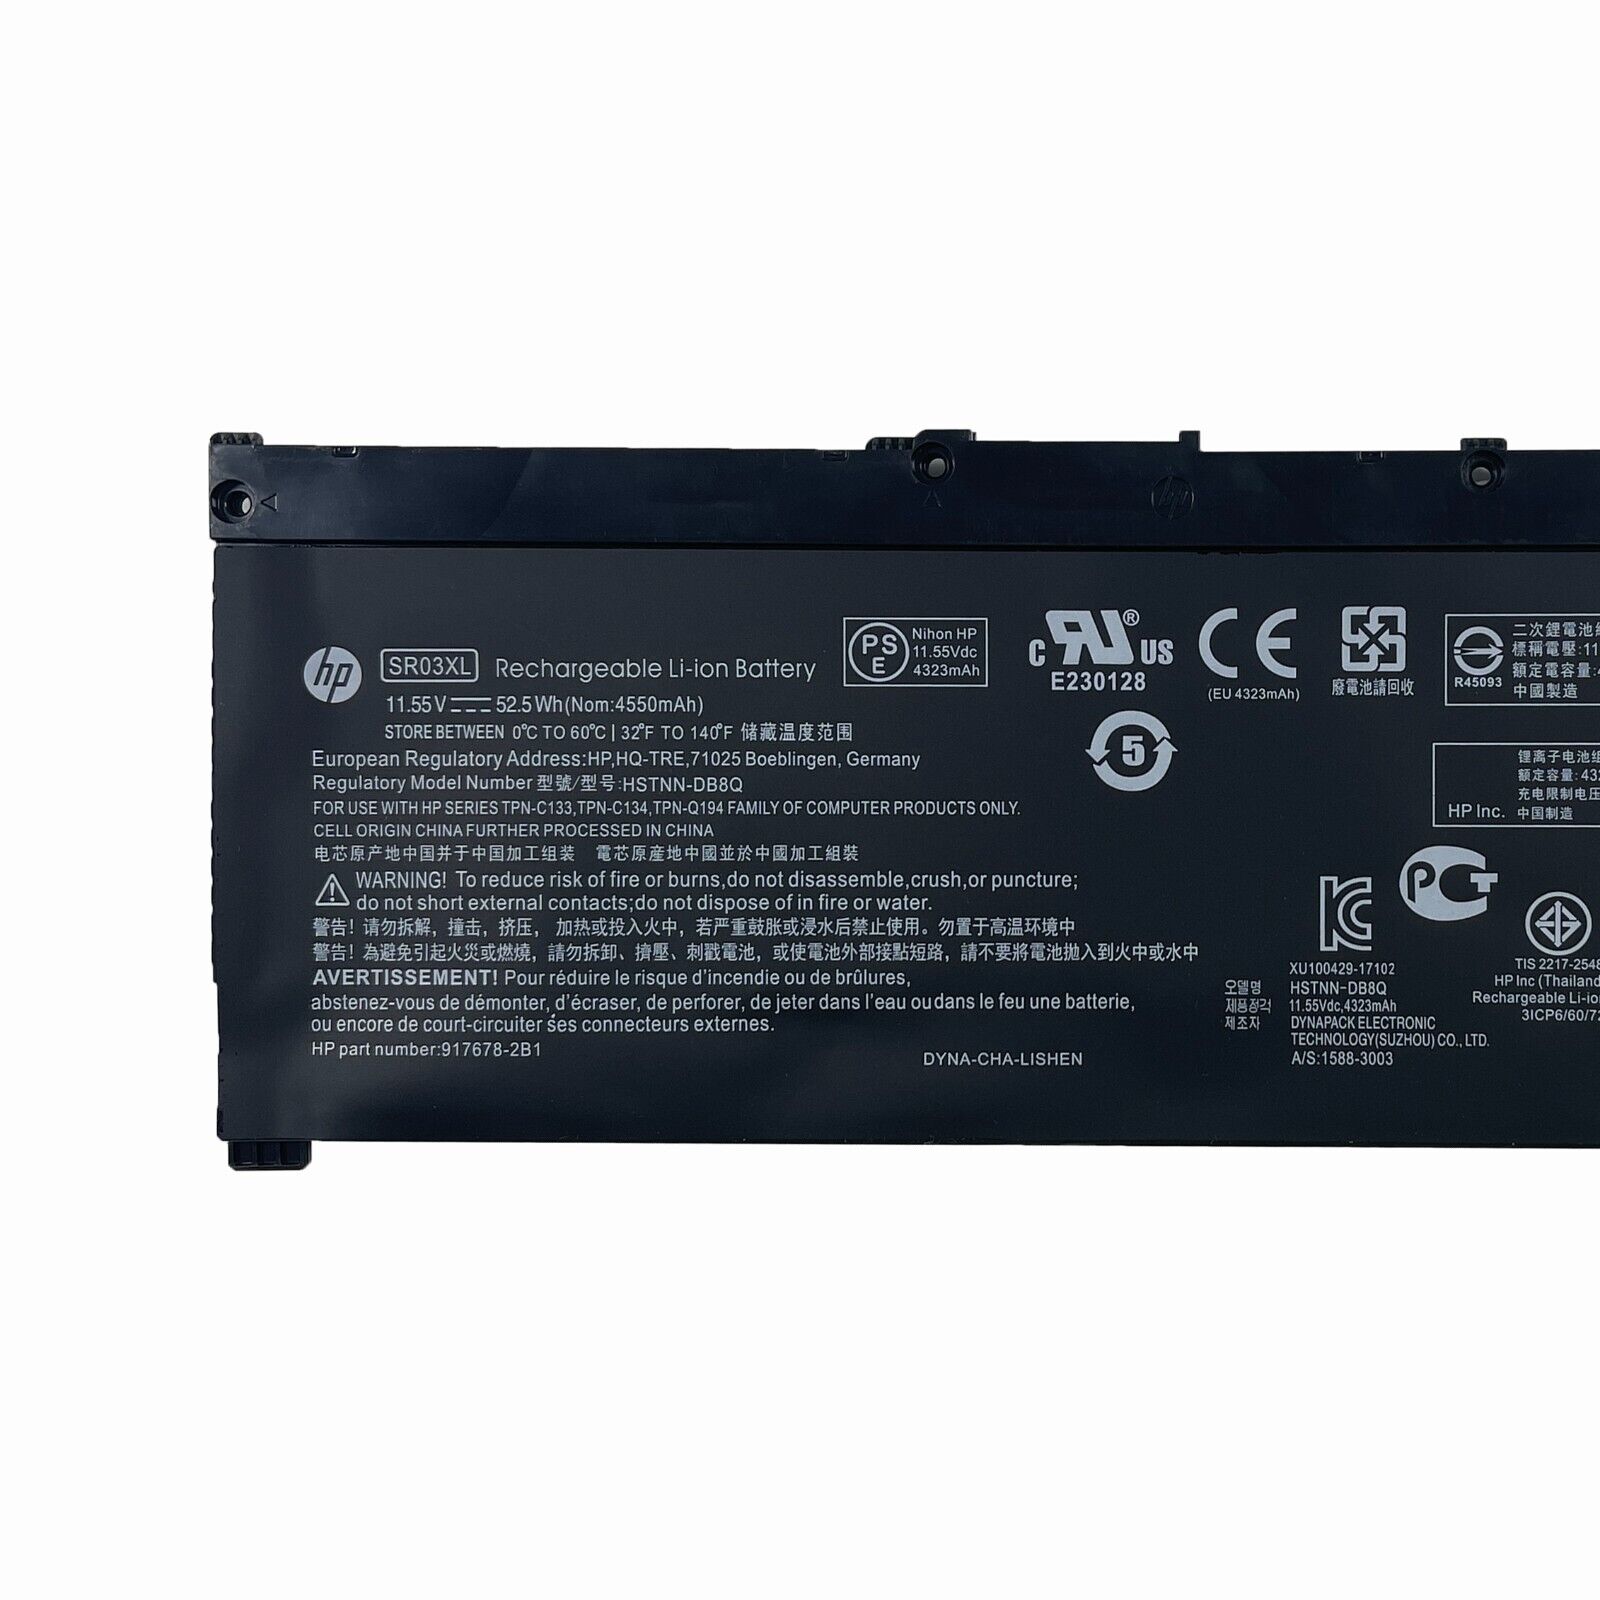 NEW OEM 52.5Wh SR03XL Battery For HP Envy 15-CP 15-CN 17-BW HP 15-cx L08855-855